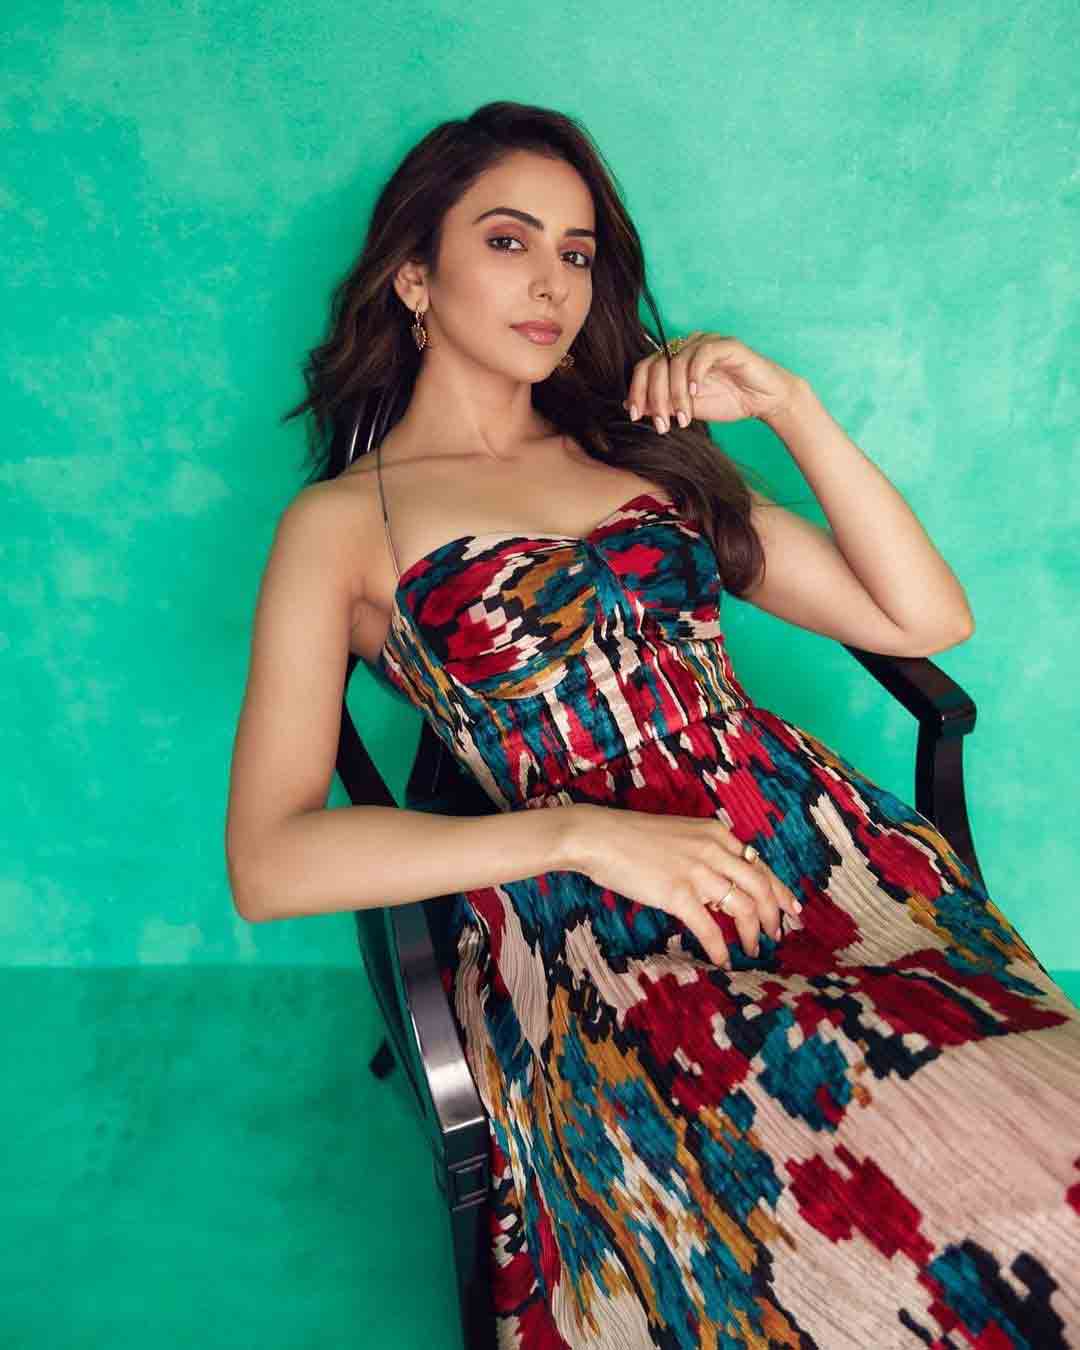 Rakul pulls off her look in a unique way with any outfit